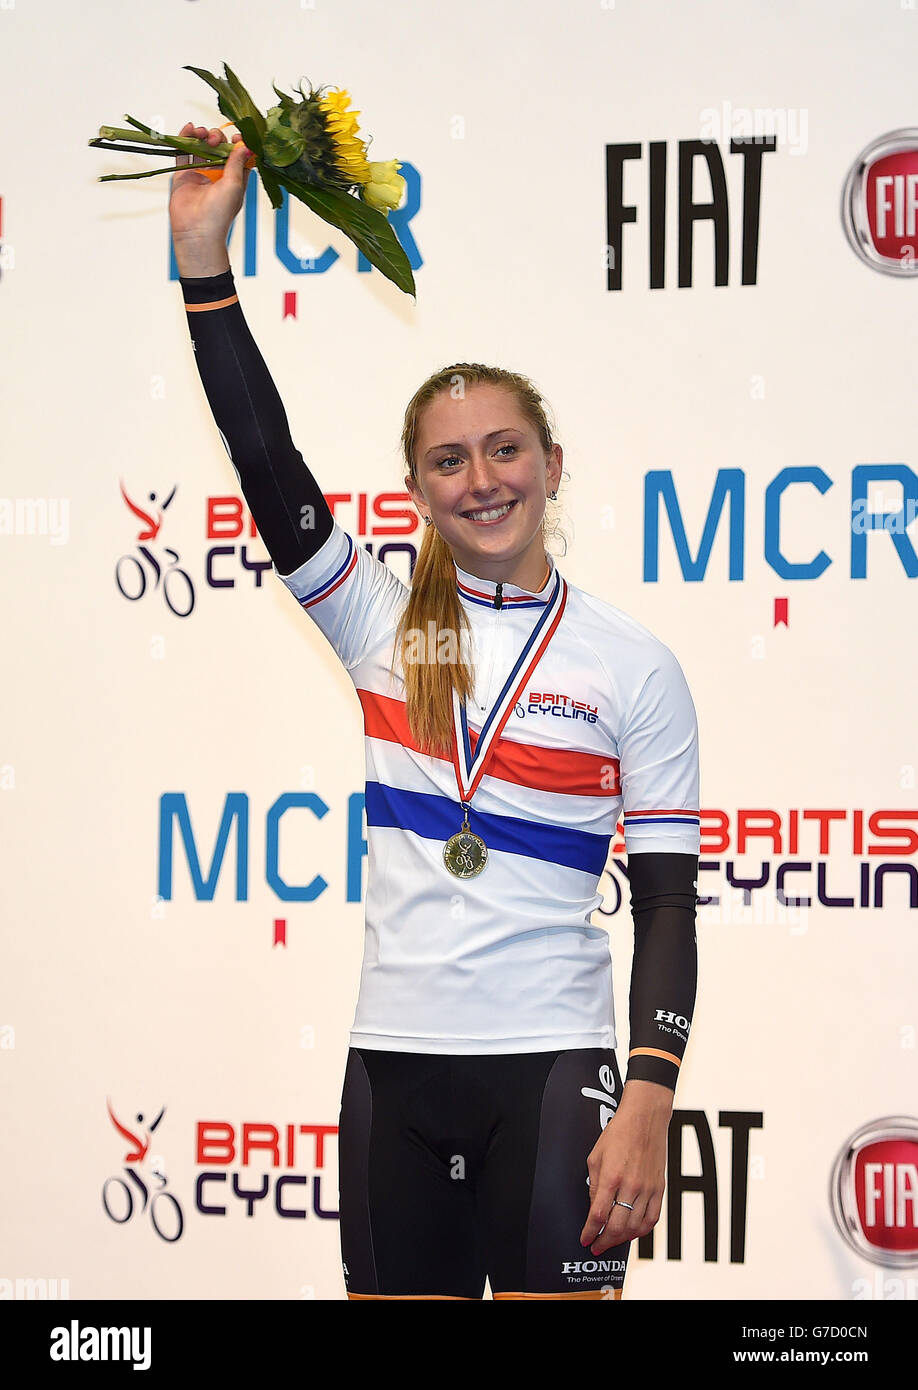 Laura Trott wit her gold medal after winning the Womens scratch race final, during day four of the British Cycling National Track Championships at the National Cycling Centre, Manchester. Stock Photo